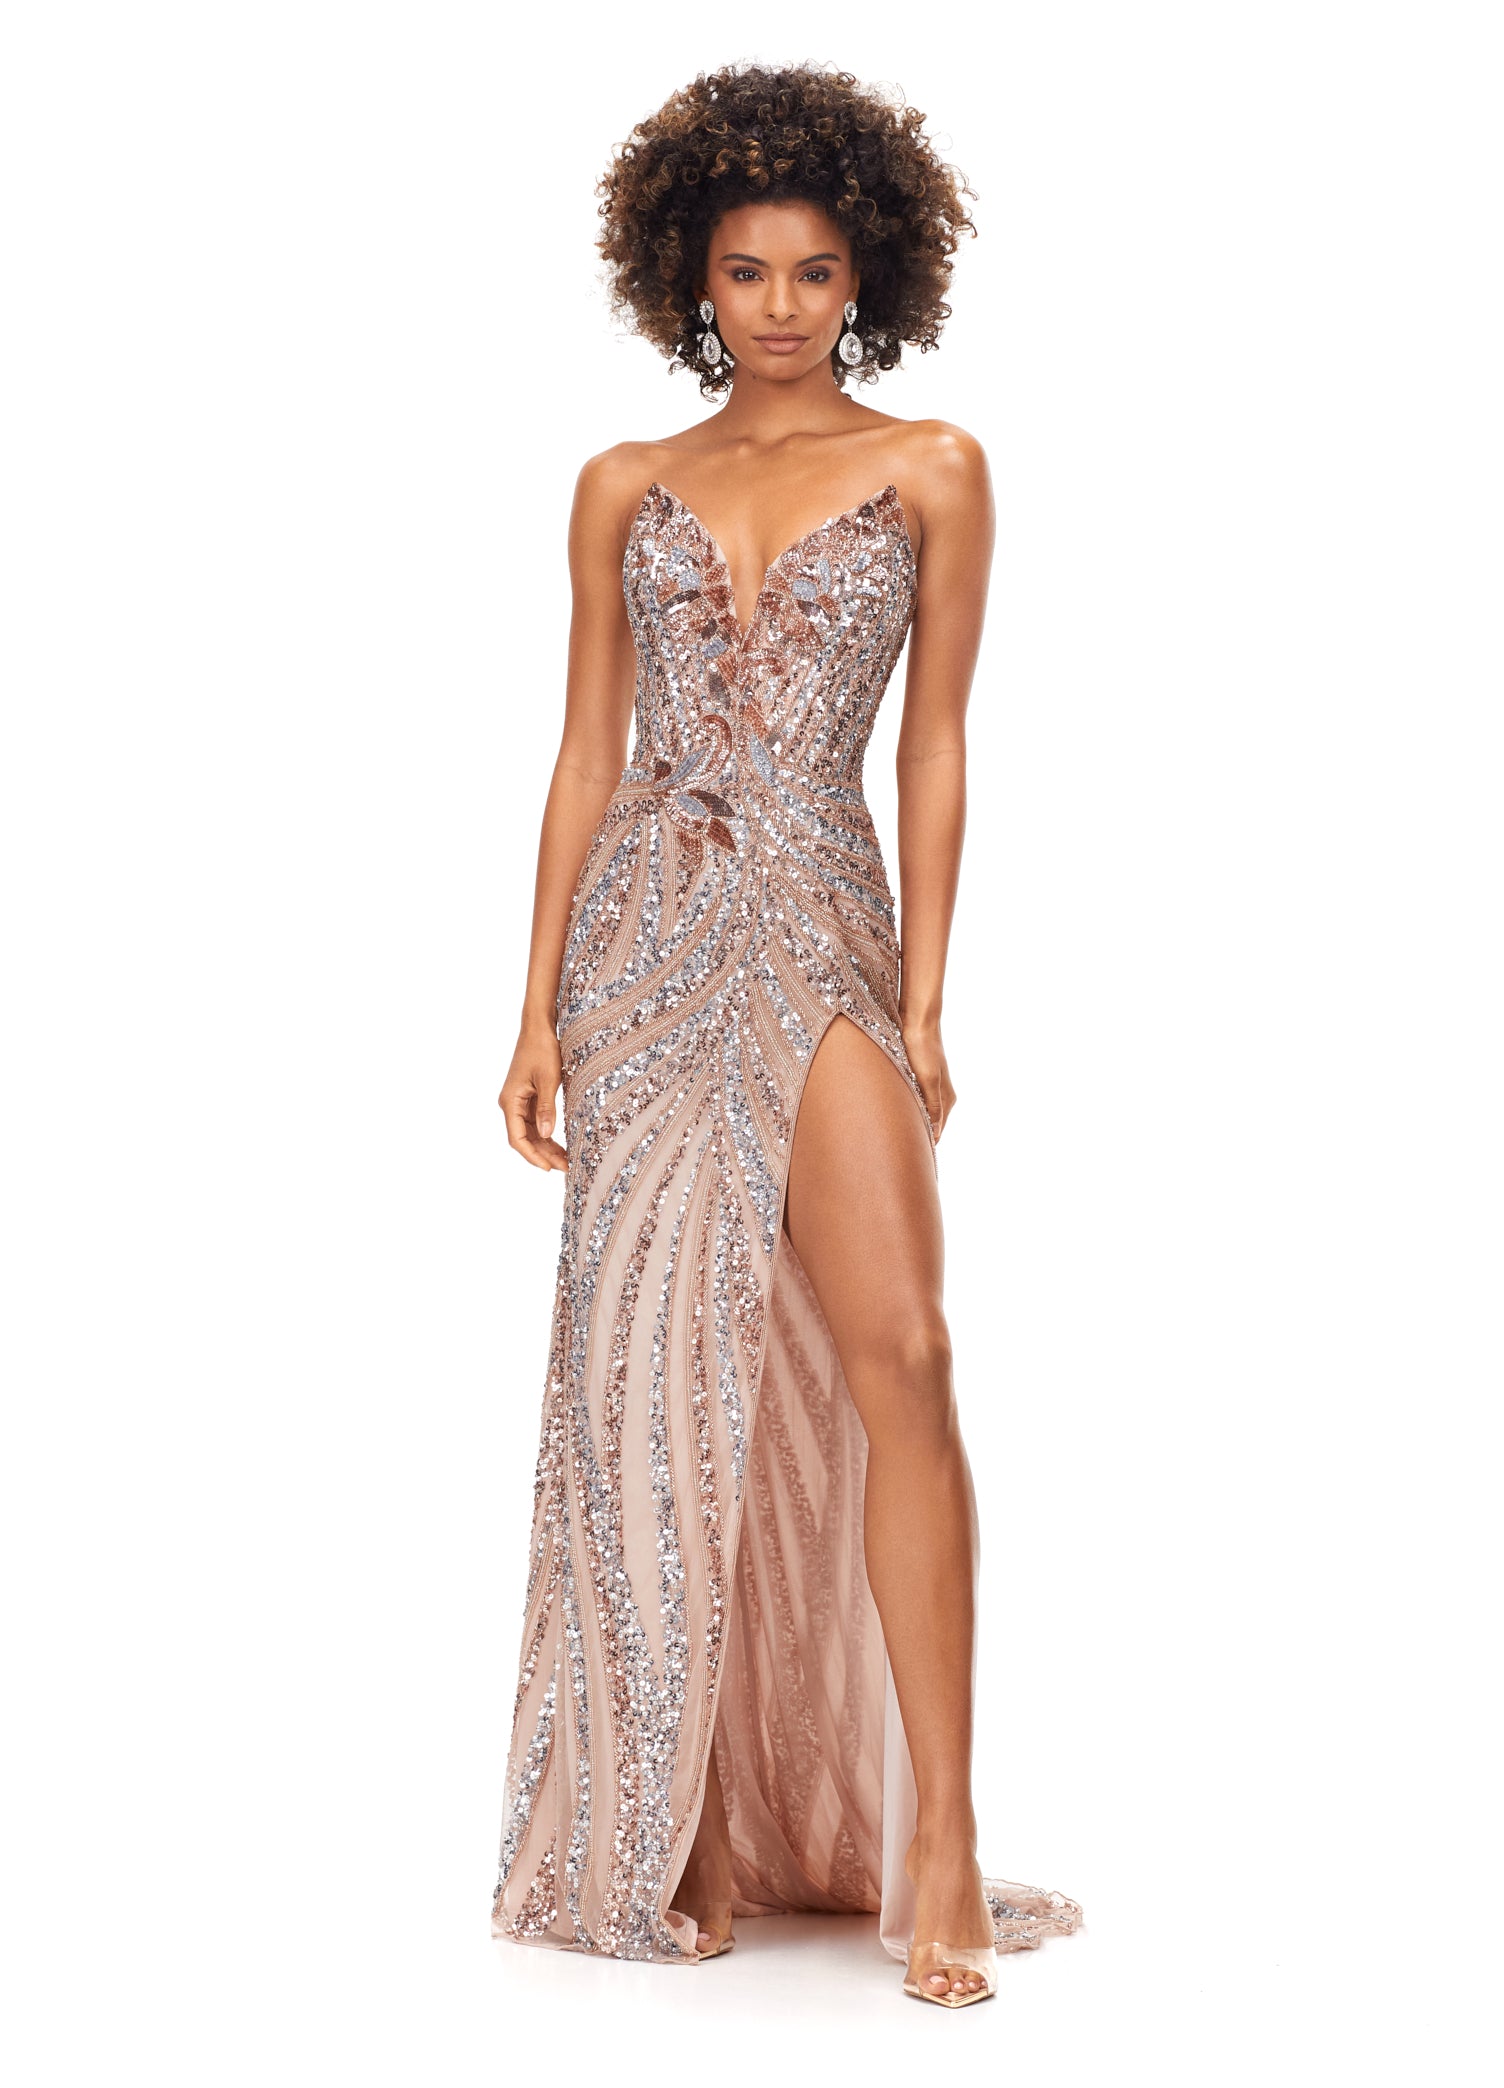 Ashley Lauren 11236 Long Fitted V Neck Slit Beaded Sequin Prom Dress Pageant Gown This strapless gown is sure to turn heads. The sweetheart neckline is complete with a modern floral sequin motif that continues down the bustier and skirt. The skirt is complete with a left leg slit. Strapless Bustier Left Leg Slit Fully Hand Beaded COLORS: Gold, Rose Gold, Gold/Black, Sky/Nude, Gold/Ivory, Fuchsia/Black, Purple, Red, Fuchsia, Bright Pink, Blue/Jade Sizes: 0-16